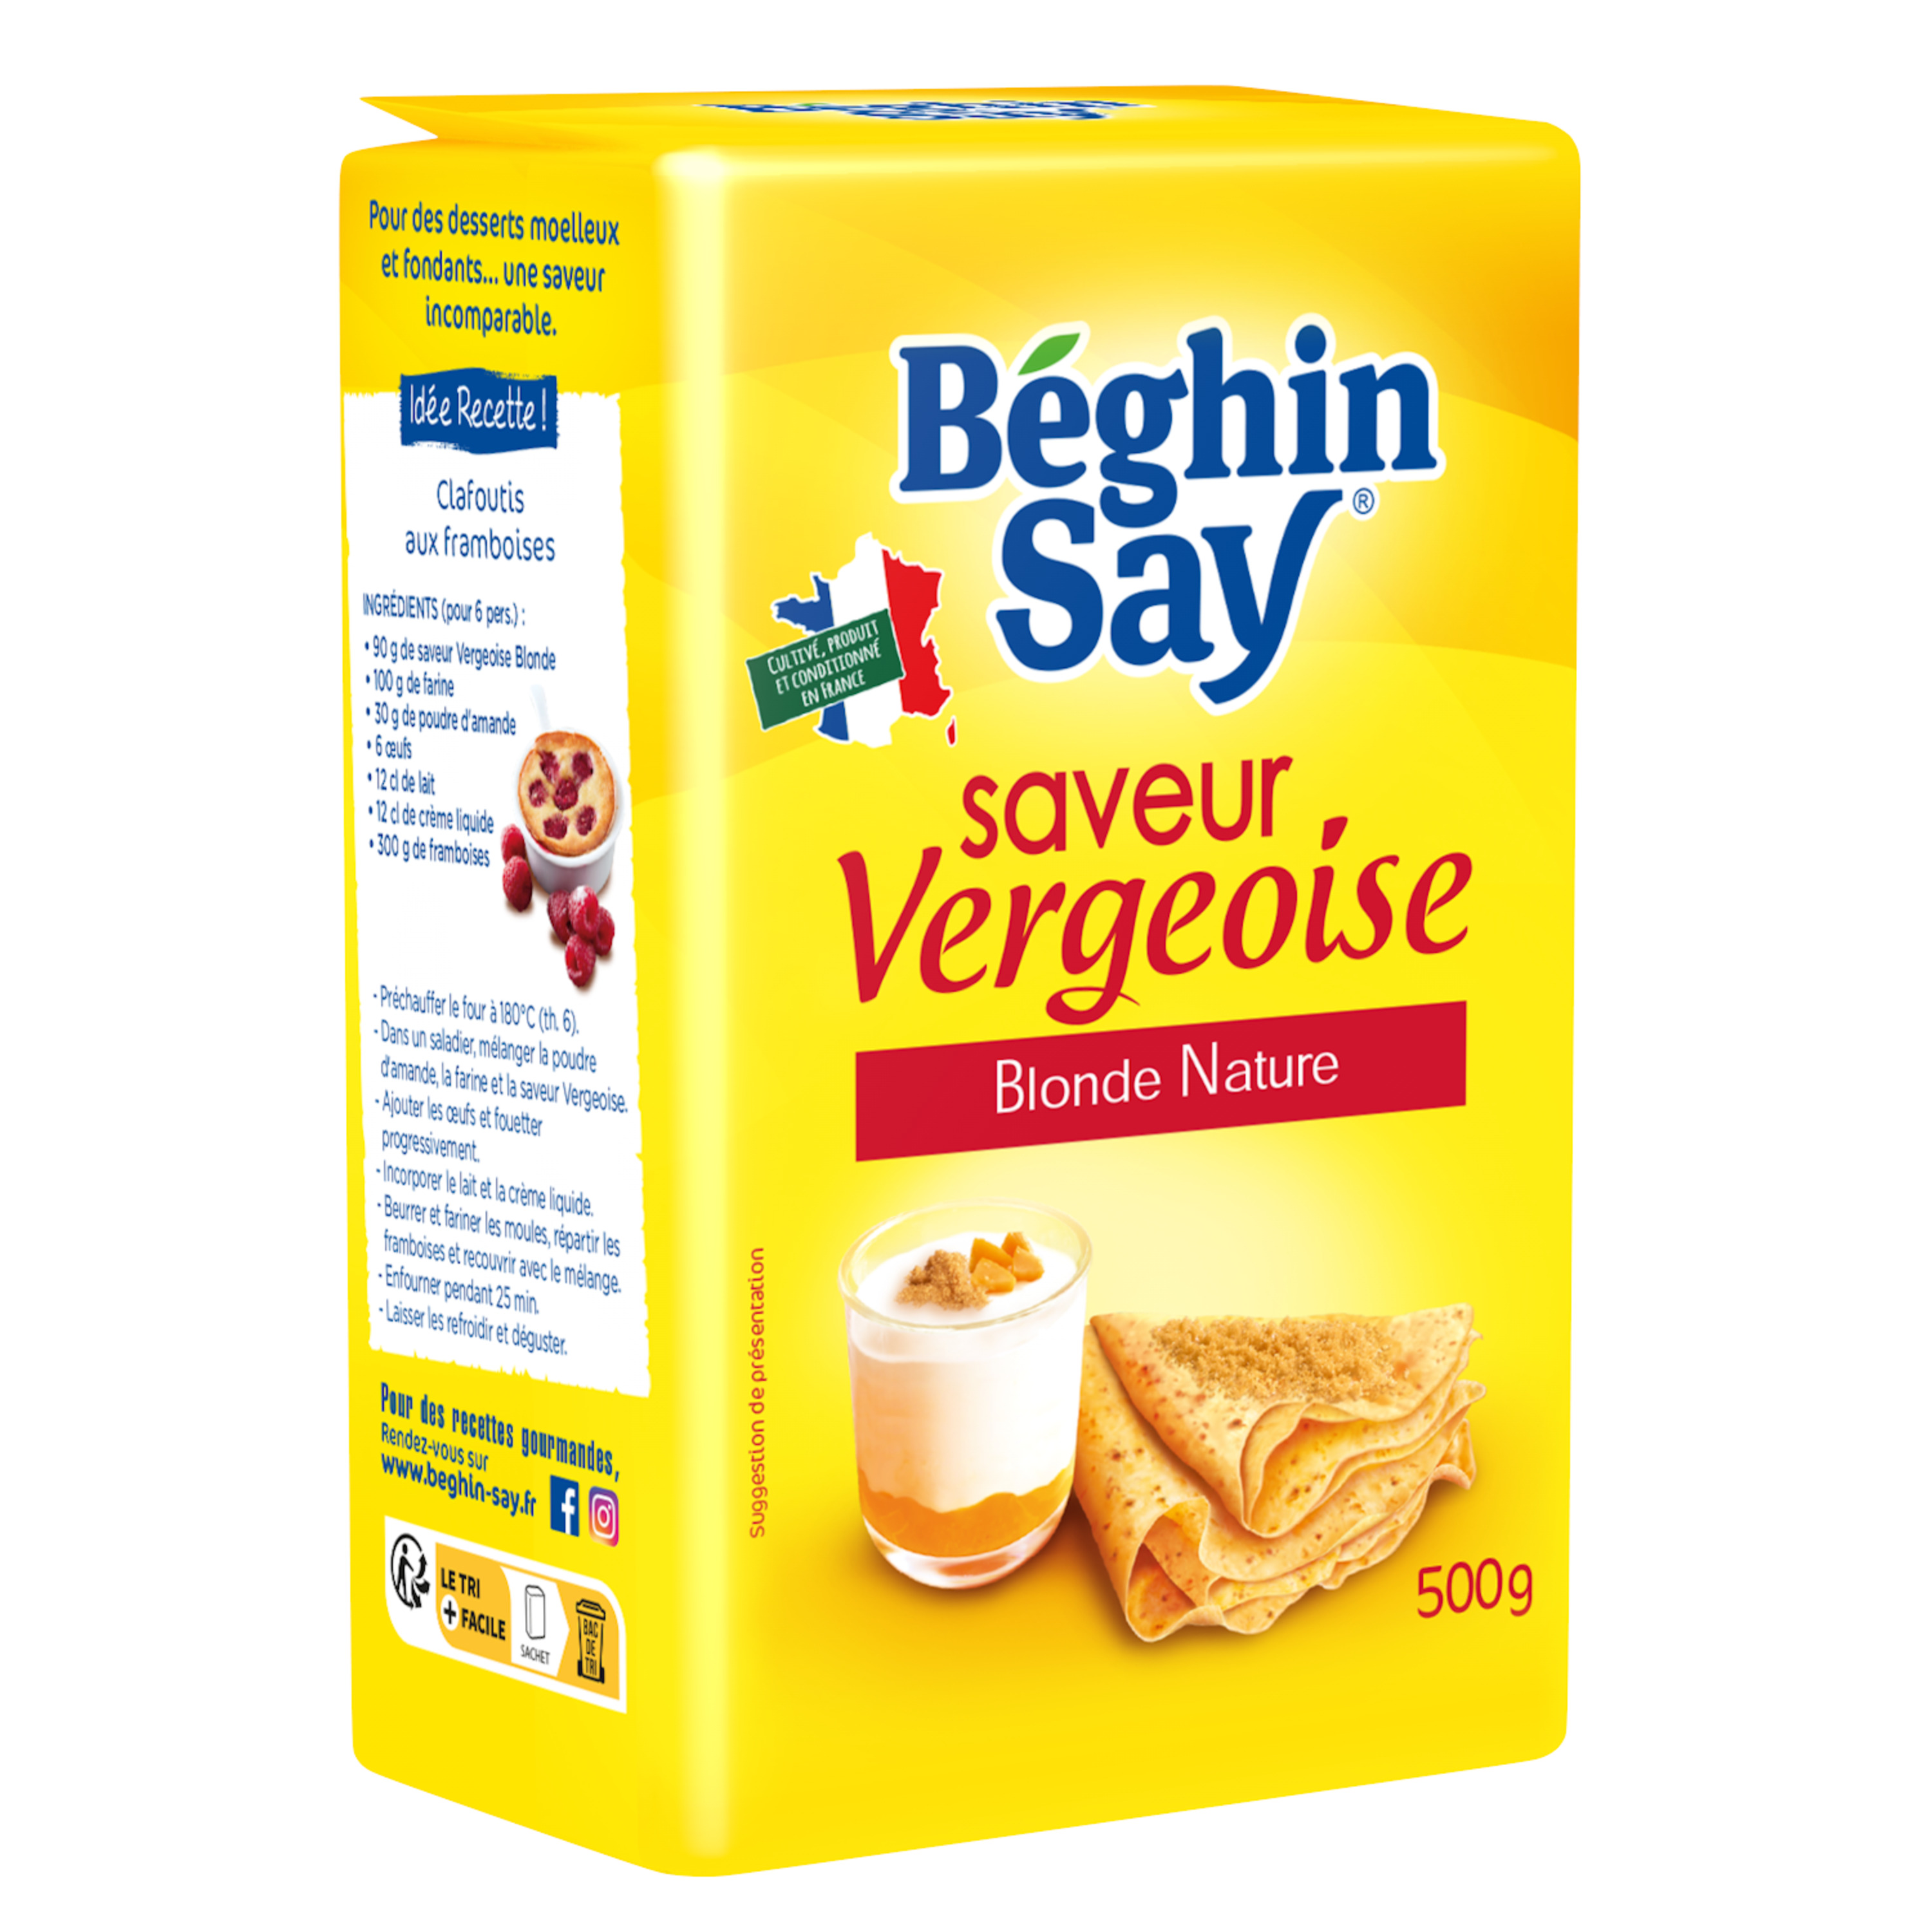 BEGHIN SAY Vergeoise blonde traditionnelle 500g pas cher 